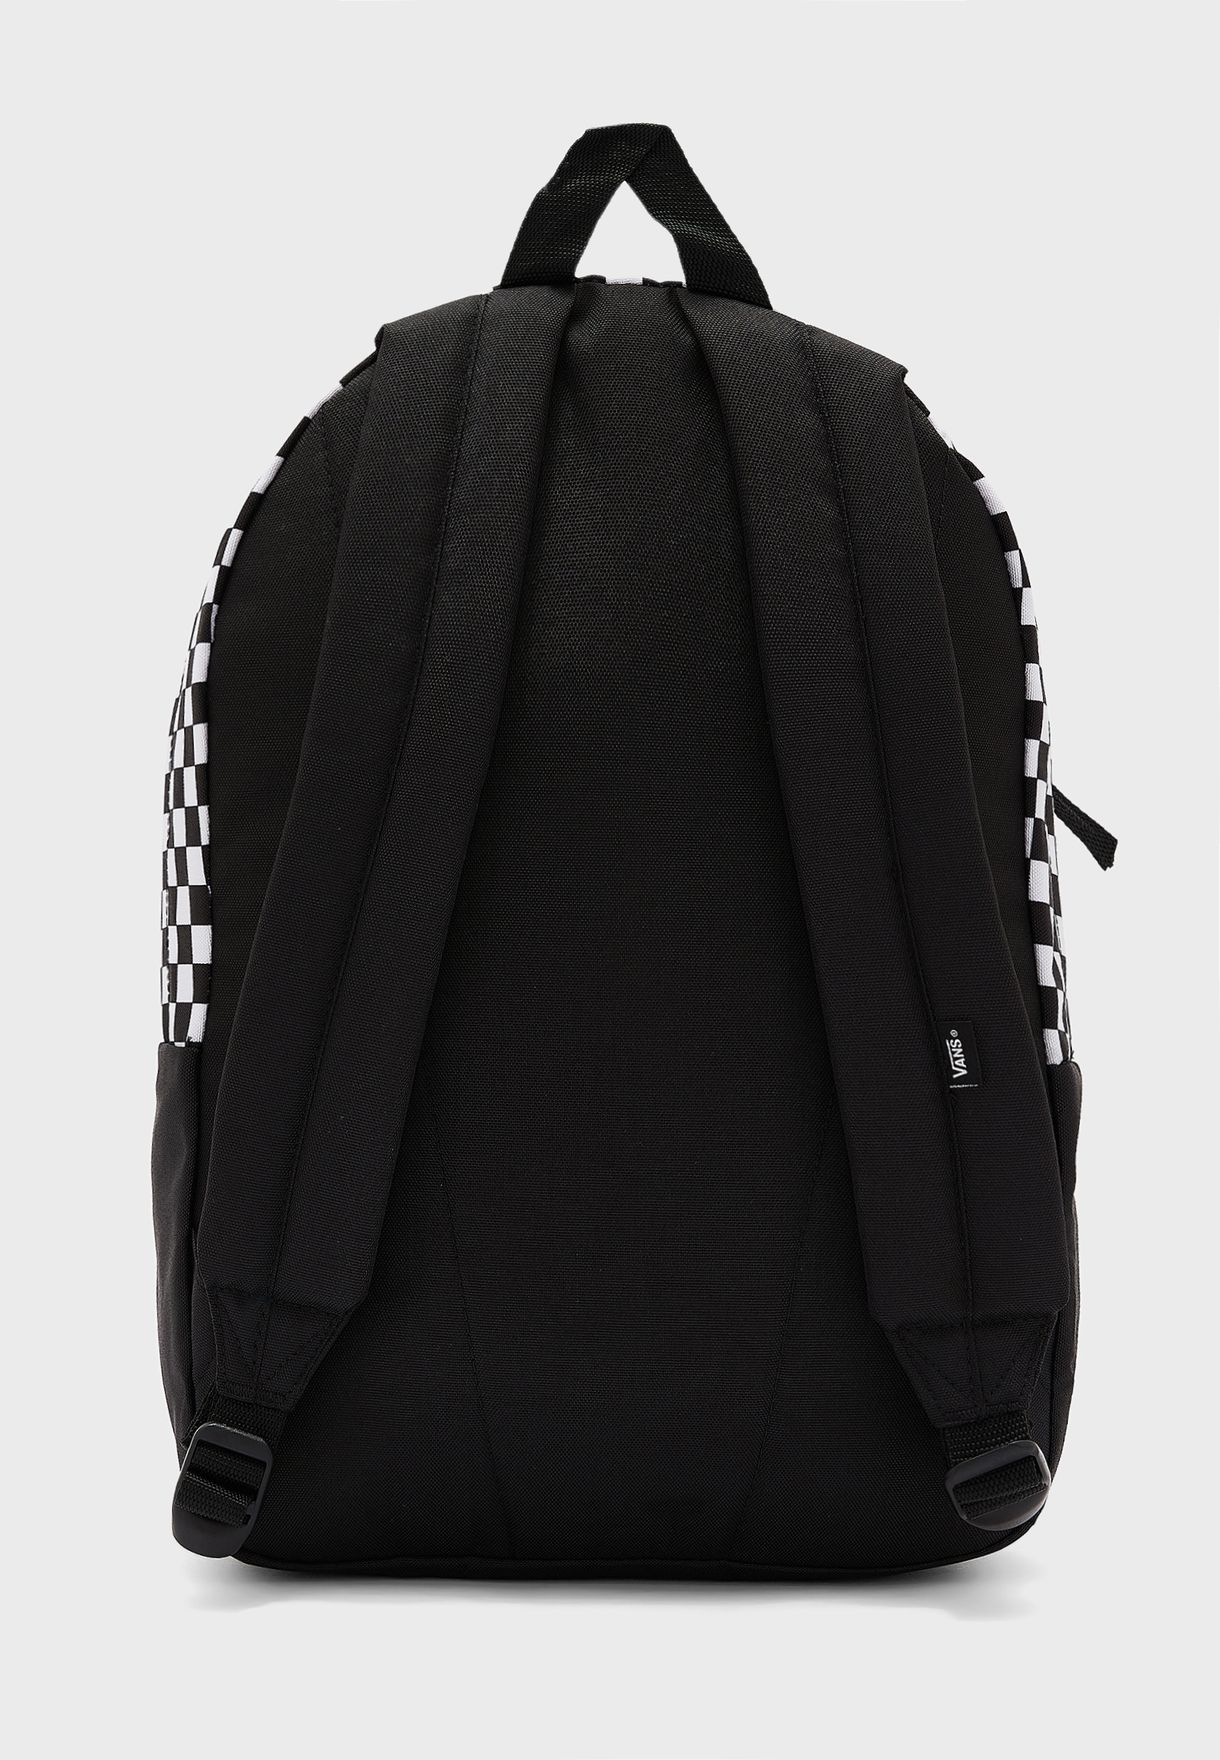 Realm Backpack